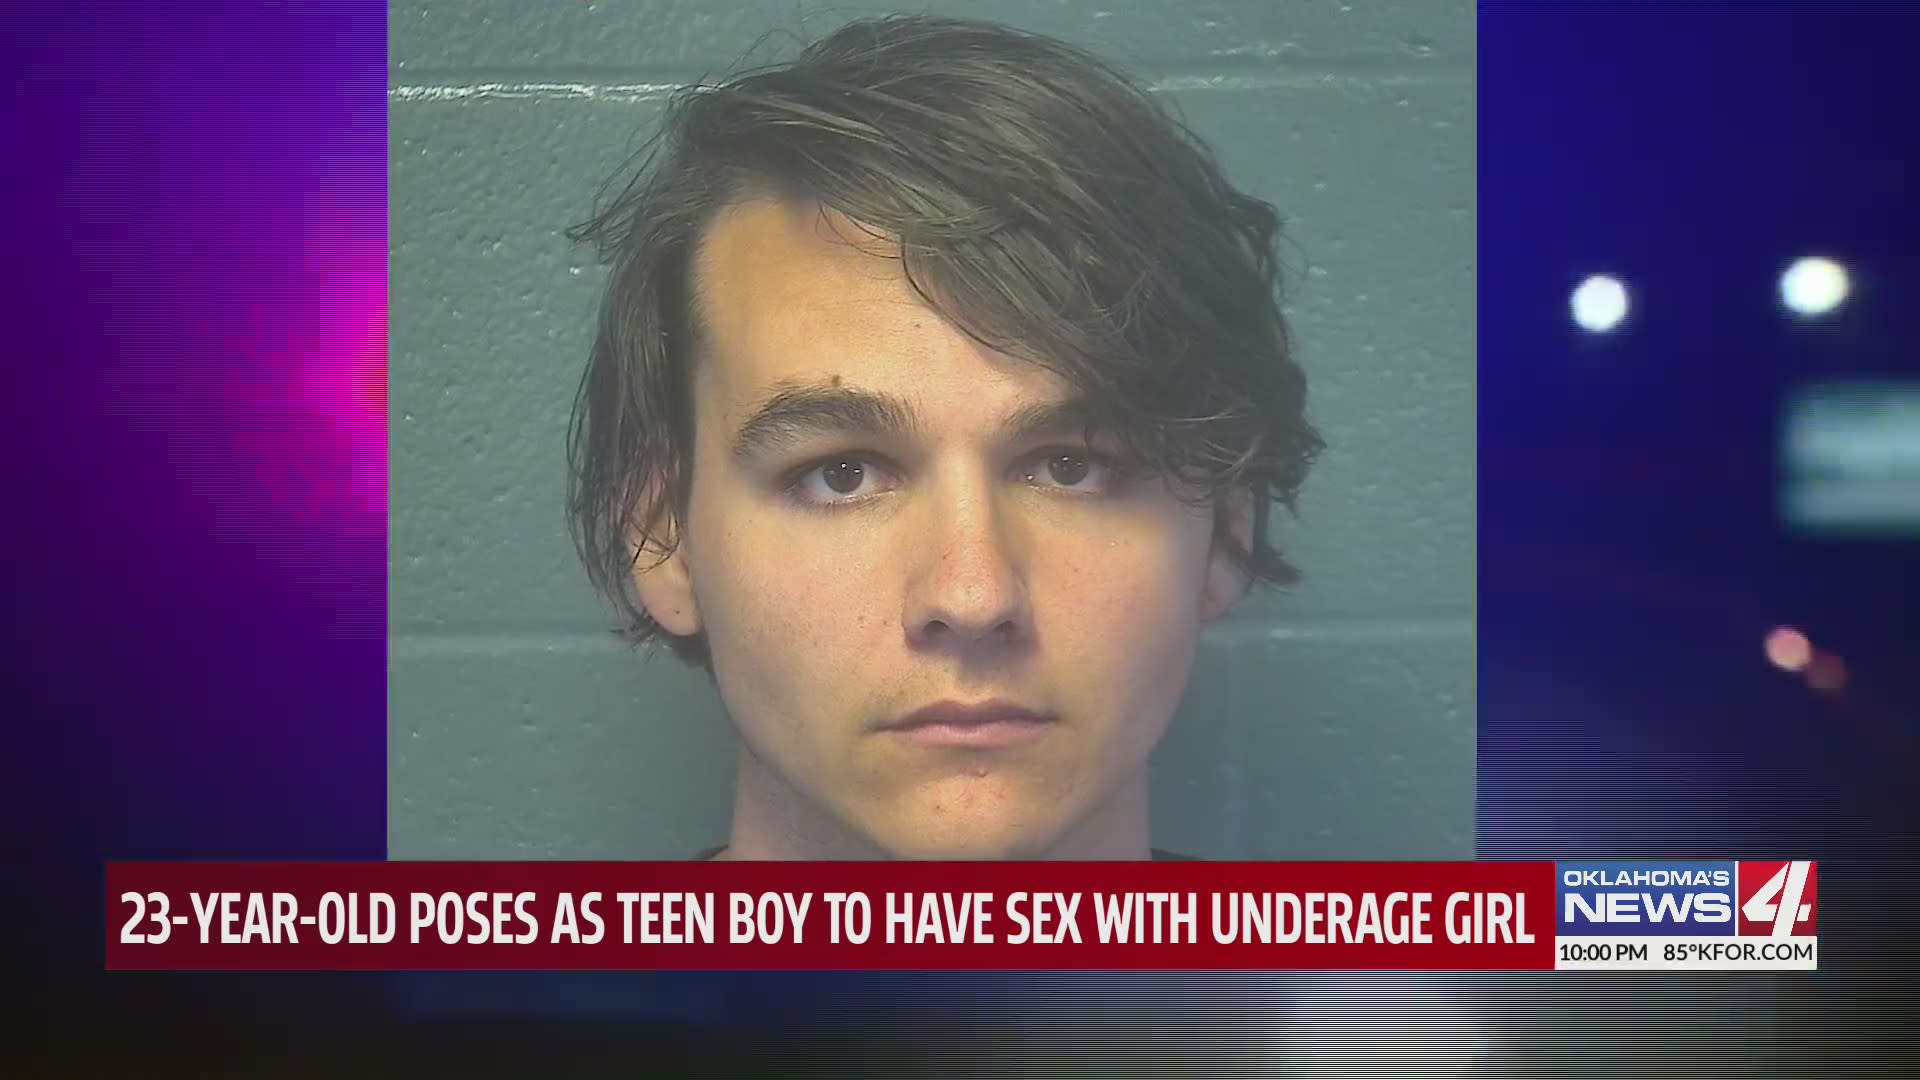 23-year-old poses as teen boy to have sex with underage girl image image